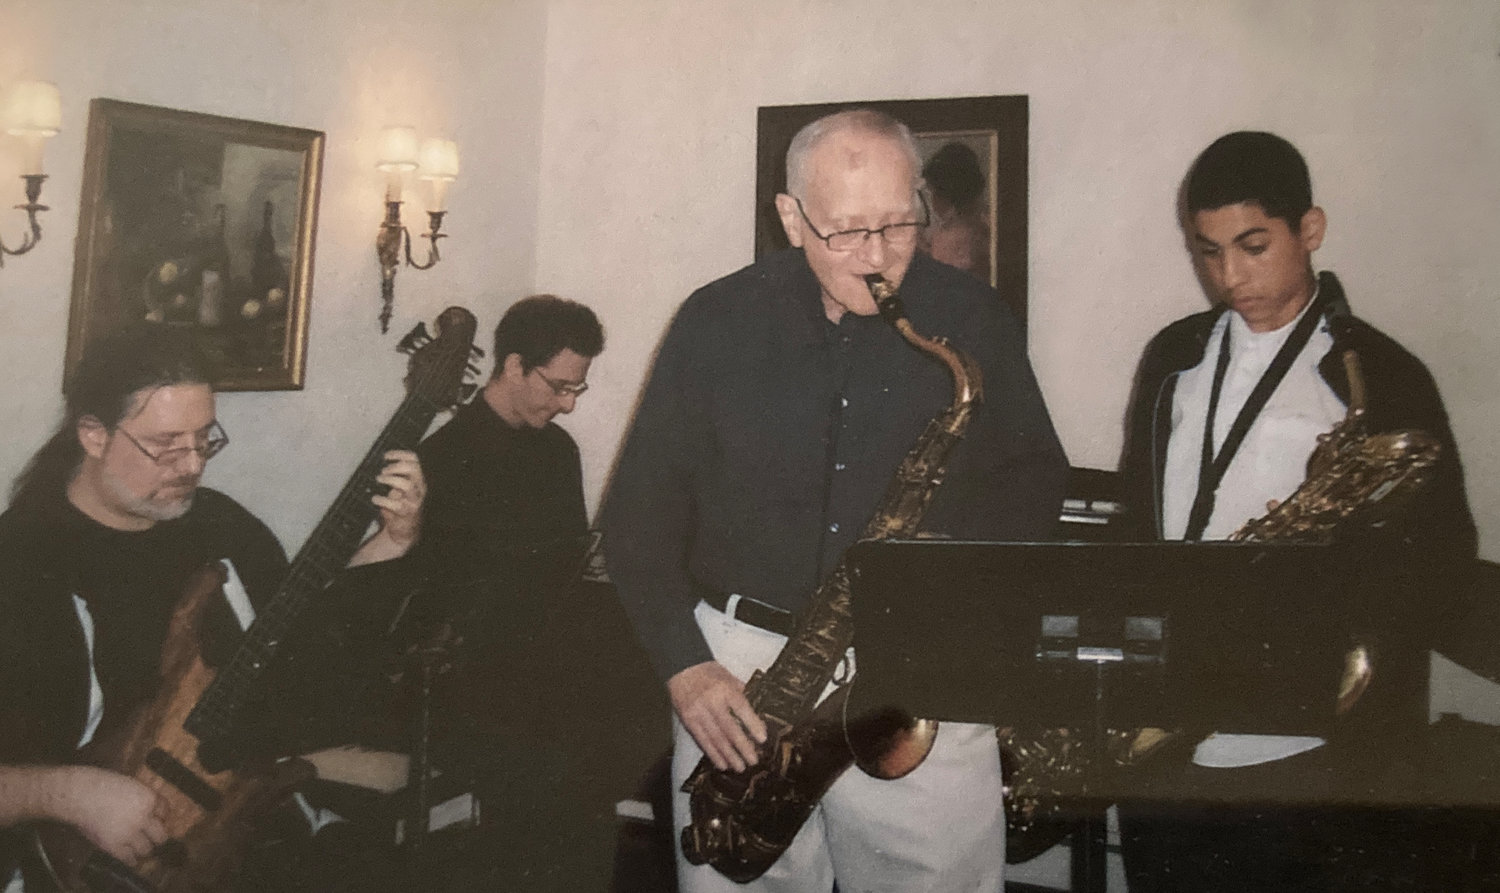 In 2011, Alan, left, and Jonathan, Bill Katz’s sons, played with their father and Alan’s son, Benjamin. It was Gloria Katz, Bill's wife's, 80th birthday